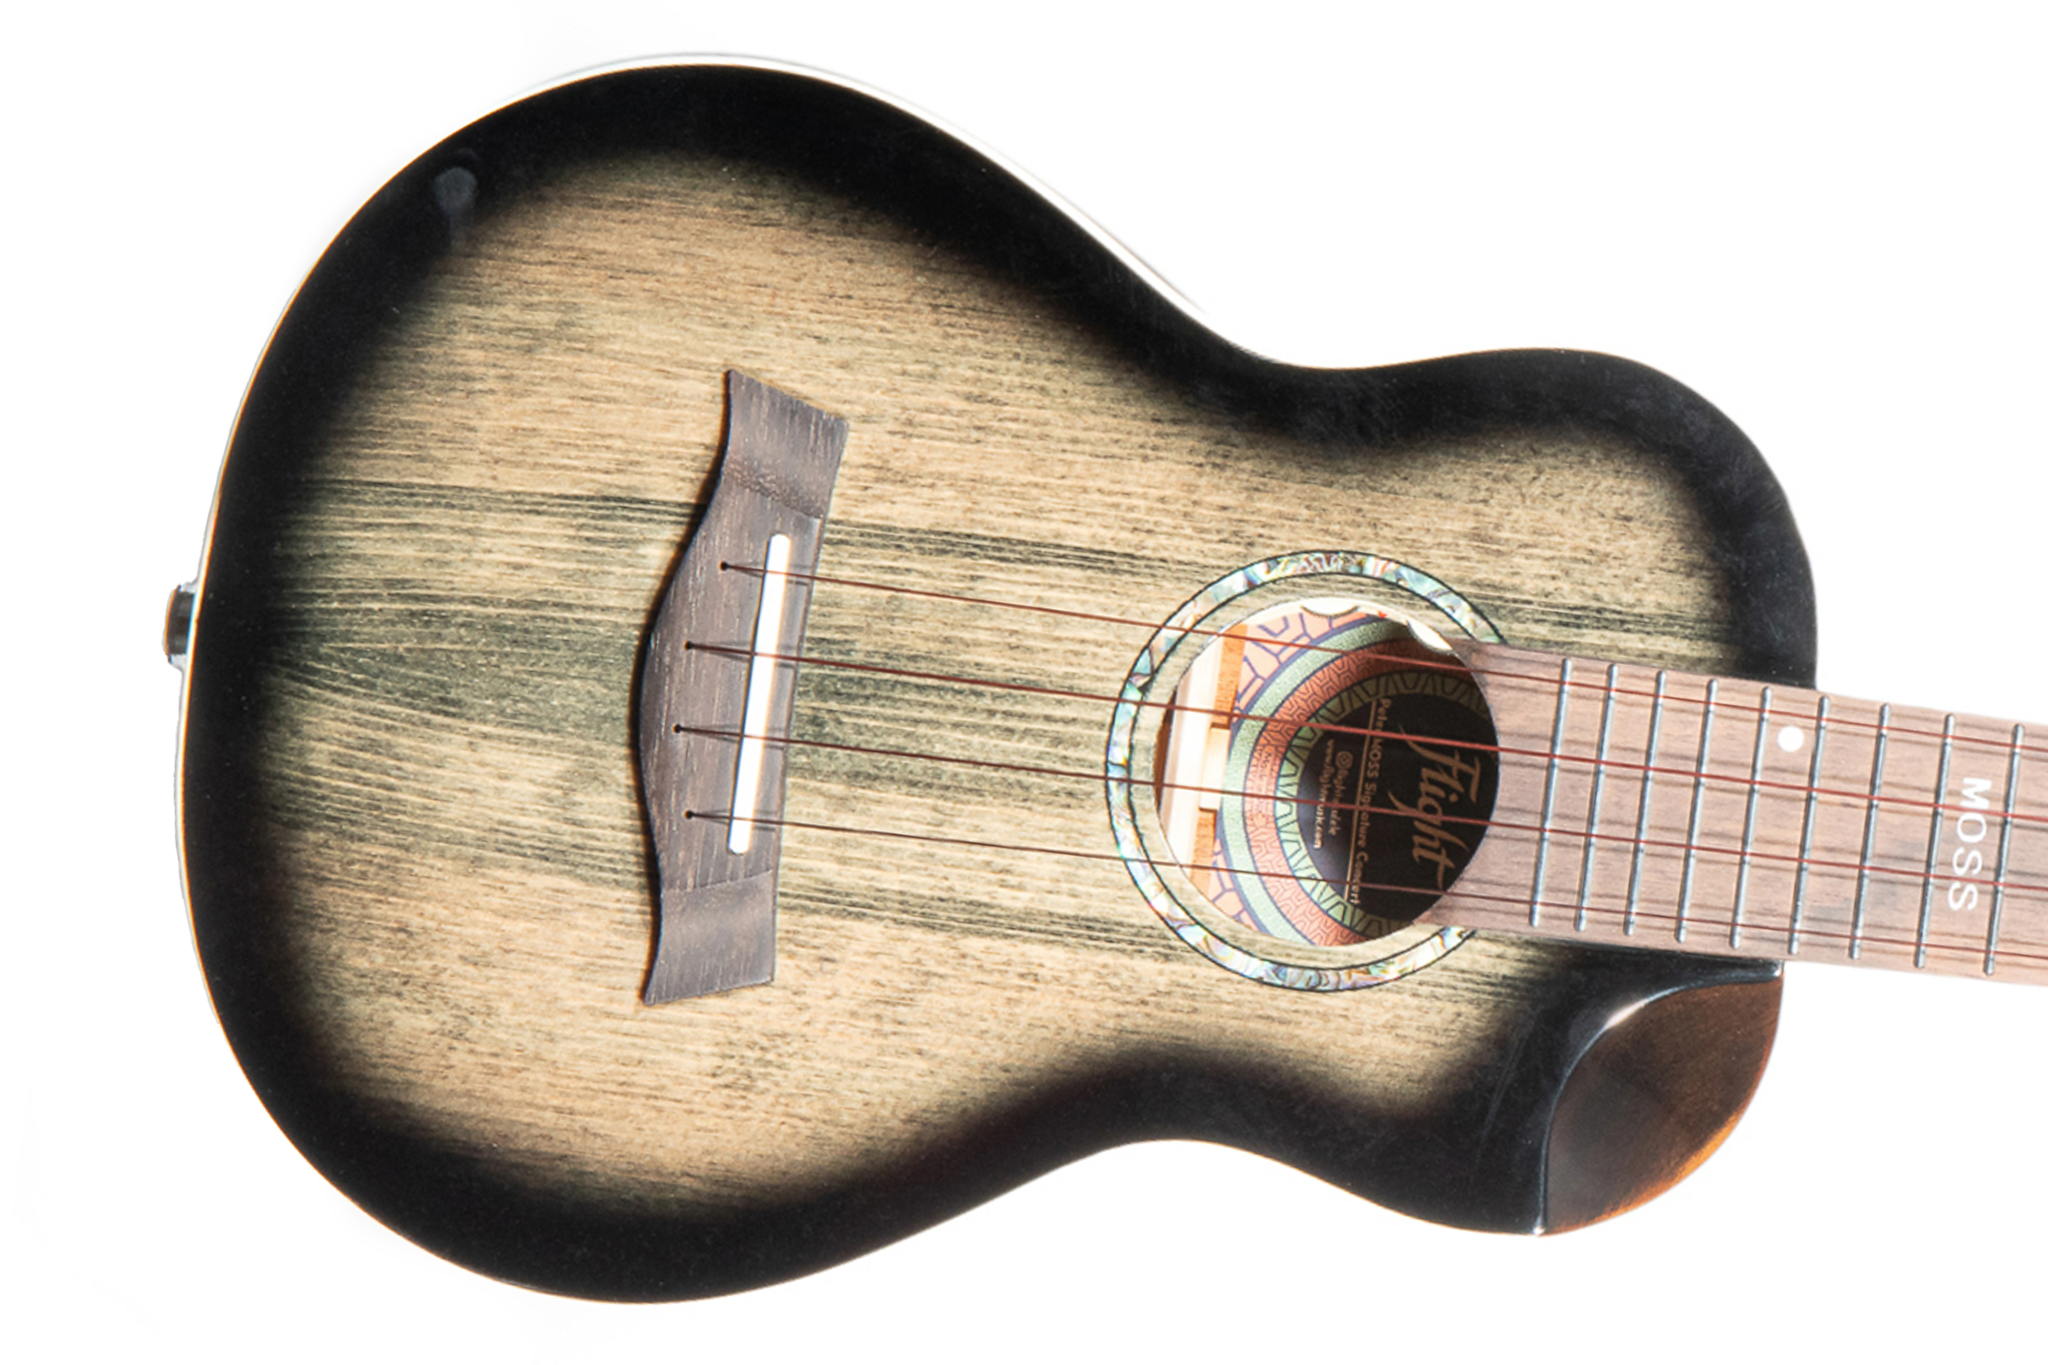 Flight Peter Moss Signature Concert Ukulele with EQ-A Solid Spruce Top "CROSSROADS"